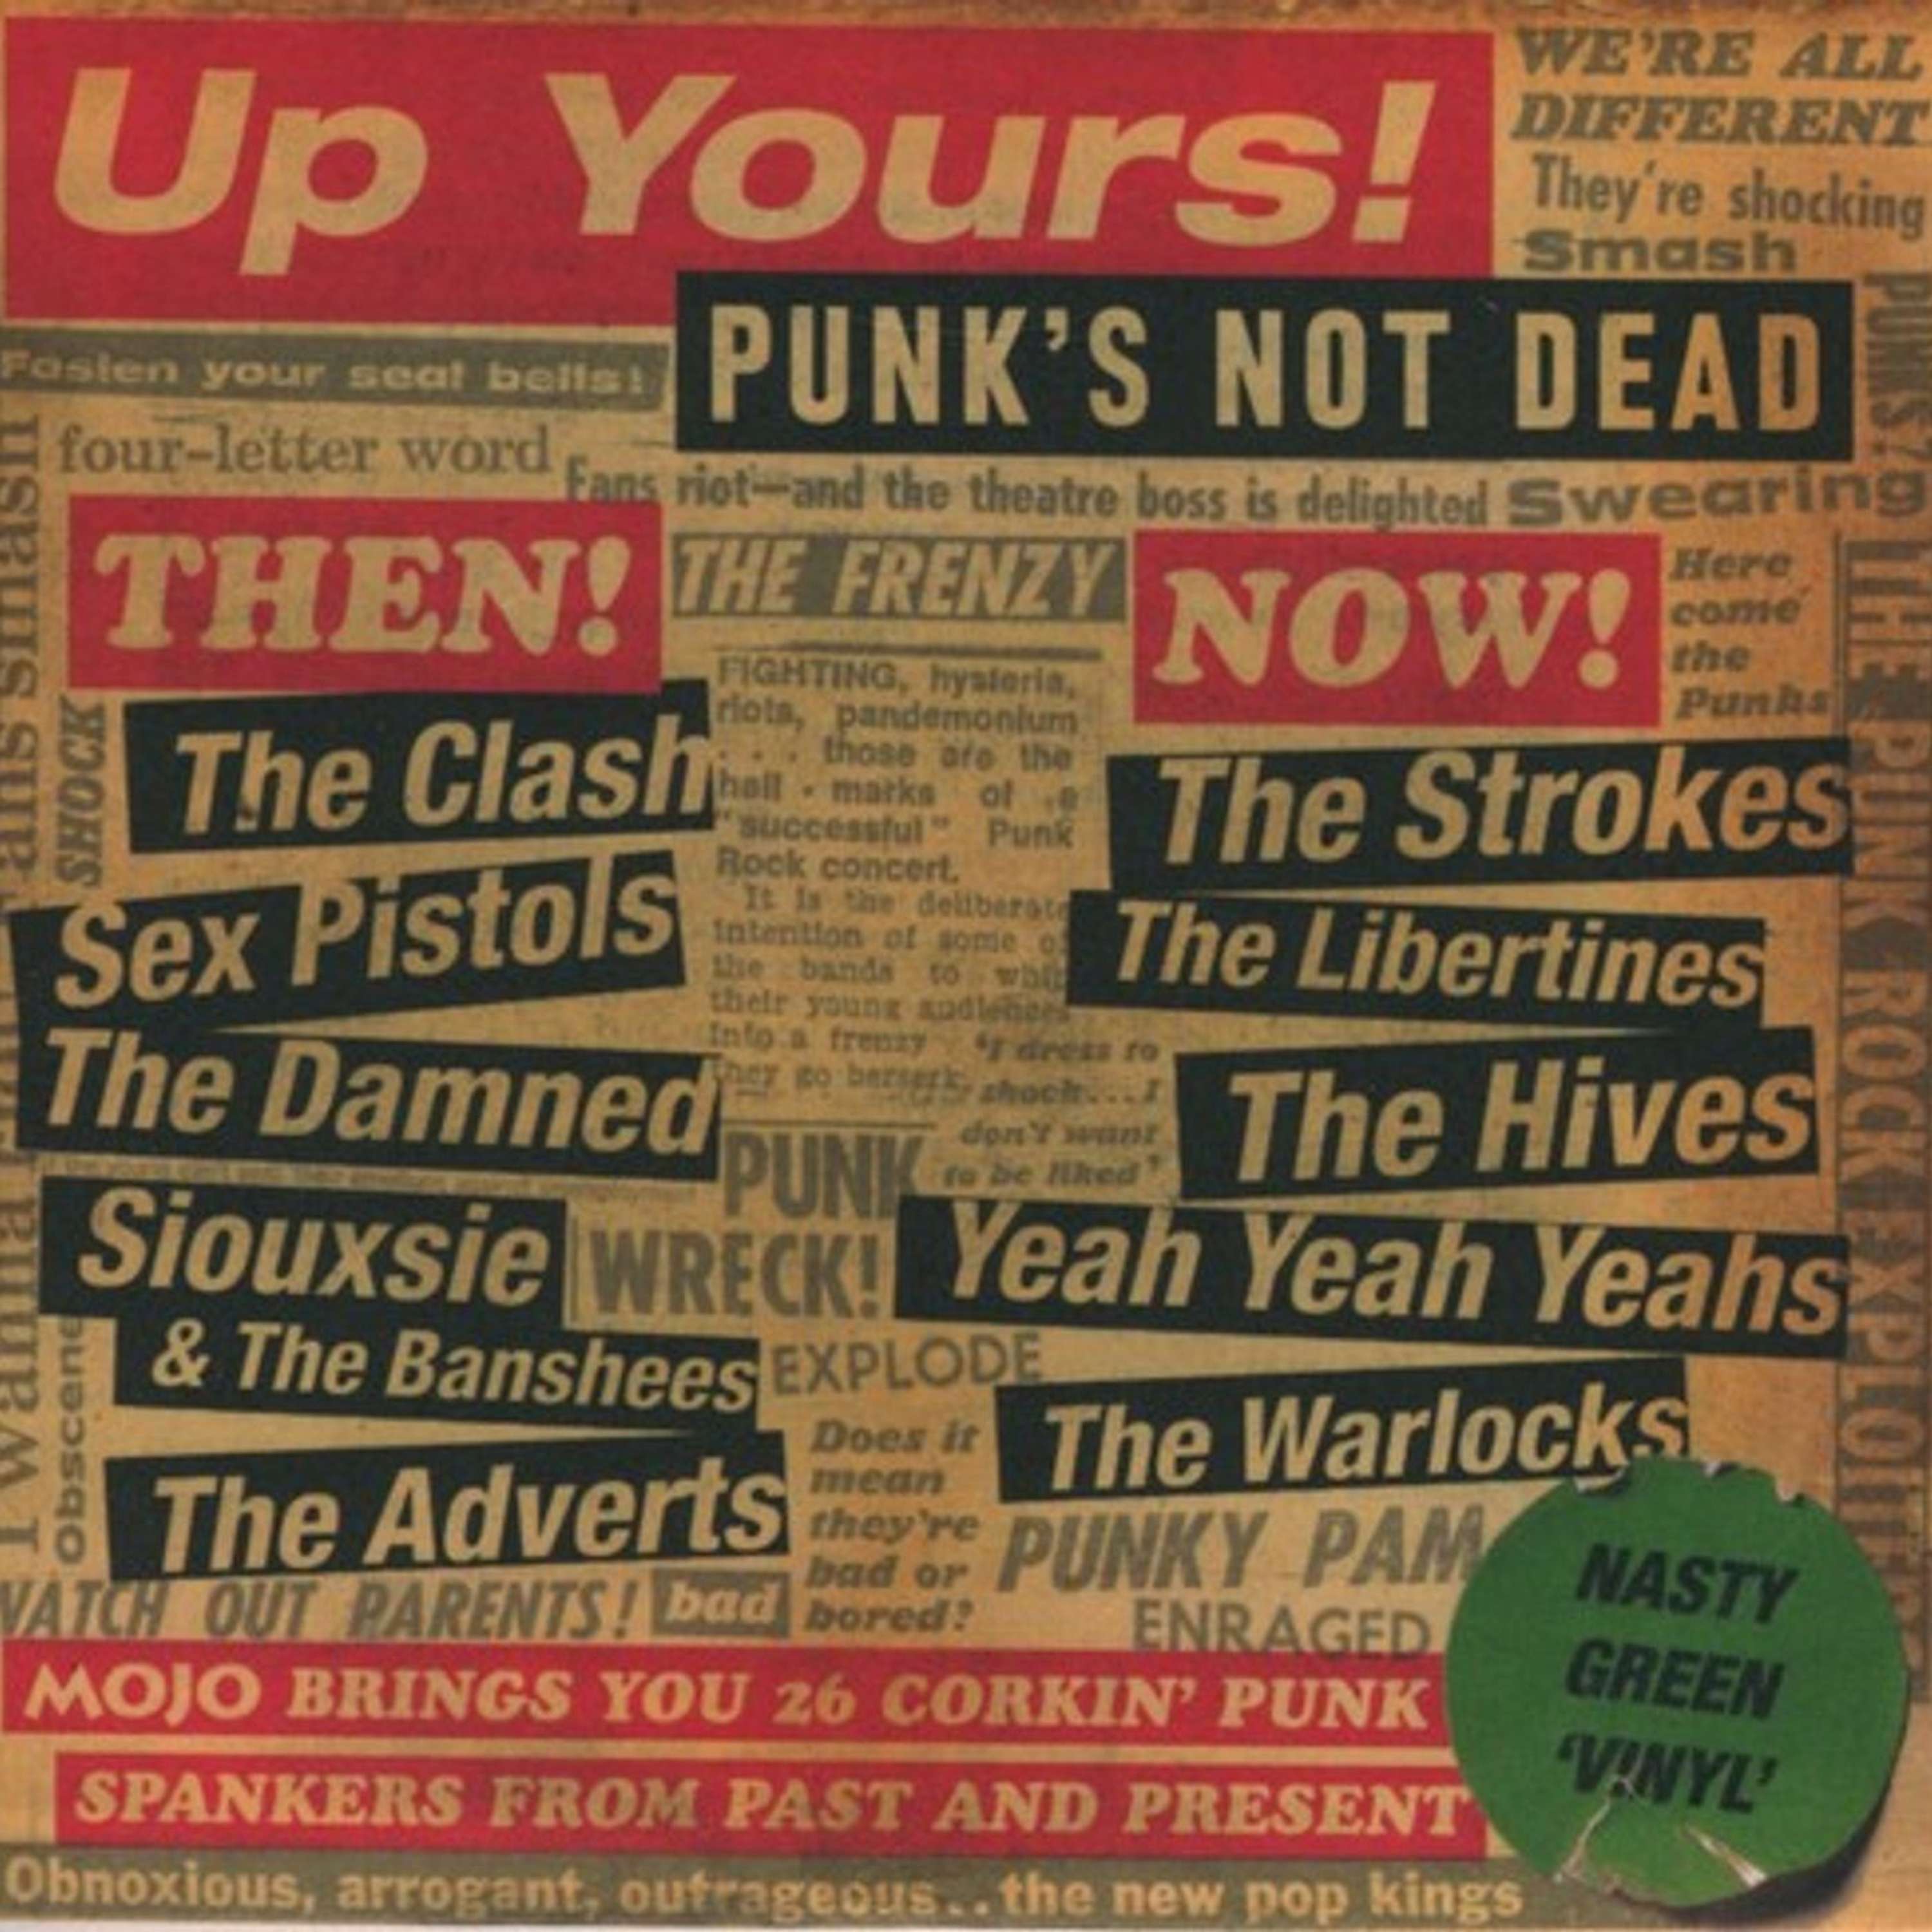 Free With This Months Issue 62 - Alex Claridge picks Mojo - Up Yours! Punk’s Not Dead